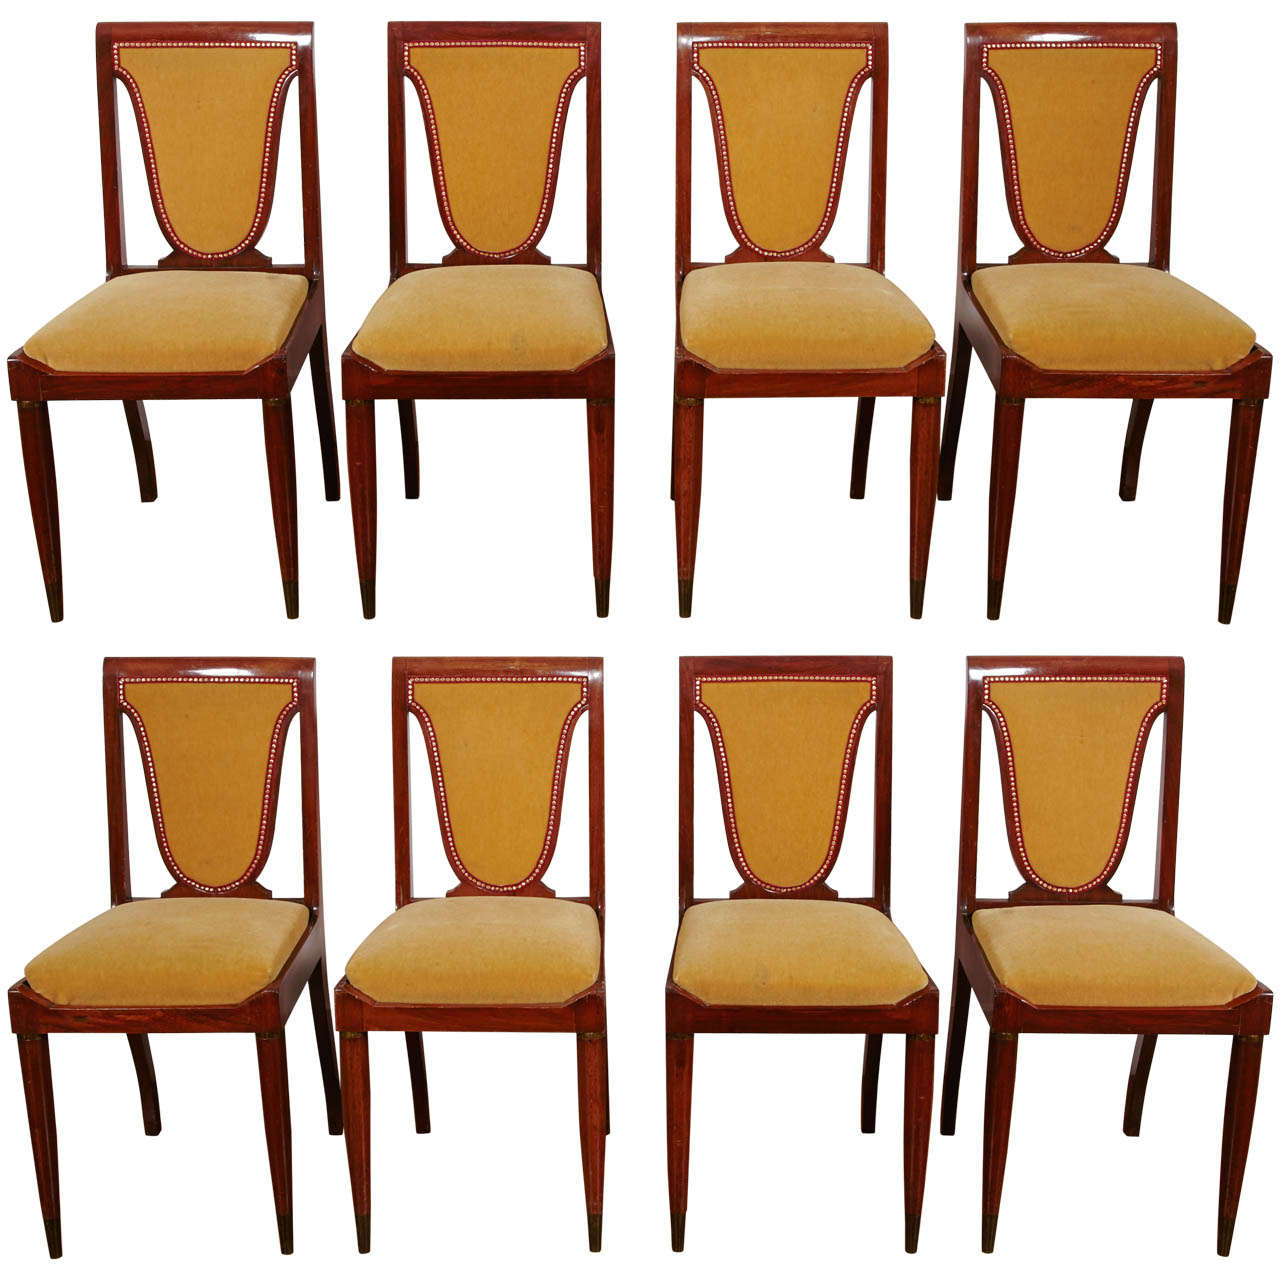 Set of Eight Mahogany Chairs, 1930's, By Christian Krass